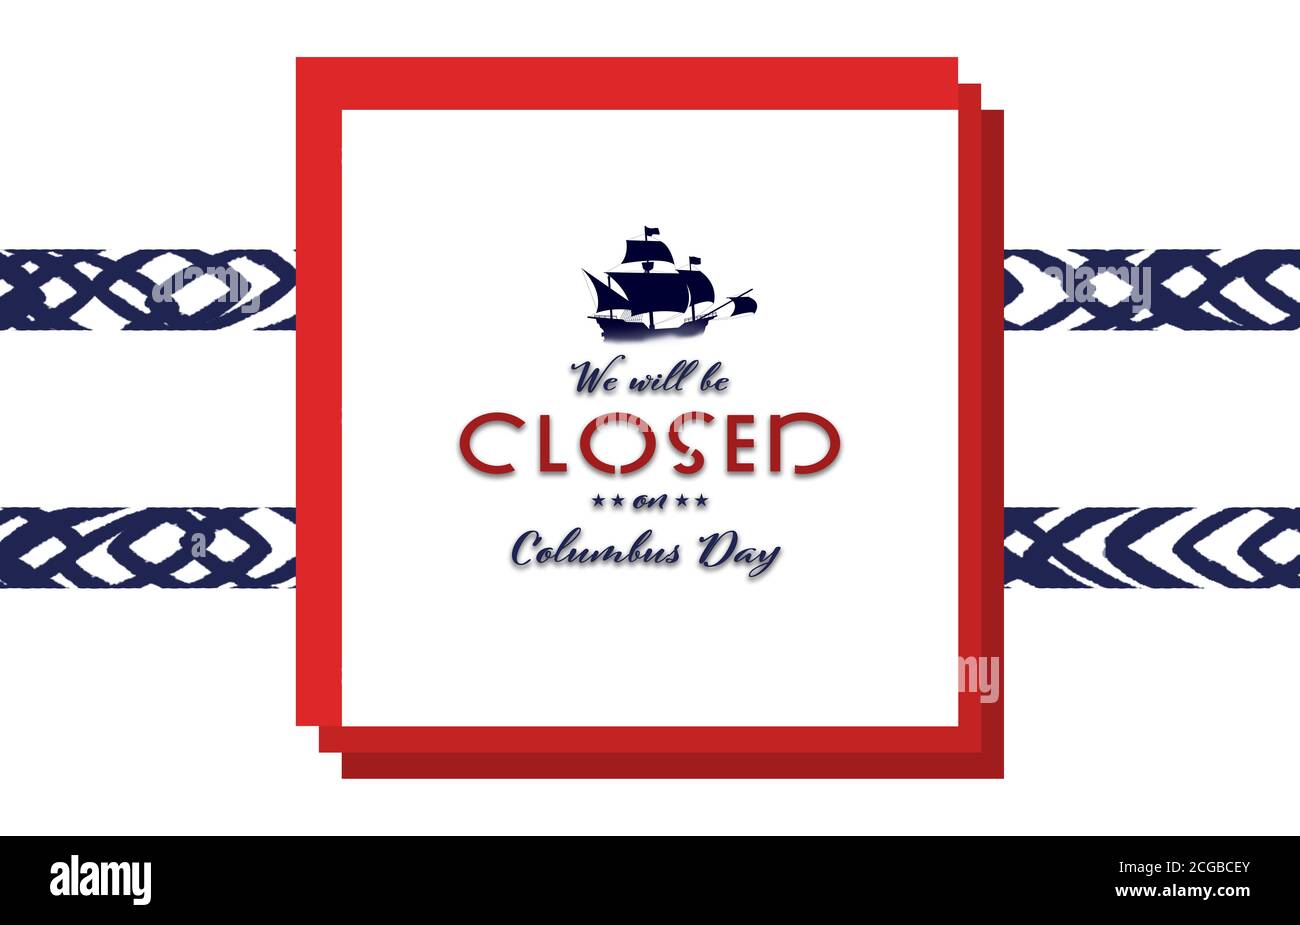 American National Holiday. US Flag background with Santa Maria. Text: We will be closed on Columbus Day. Stock Photo